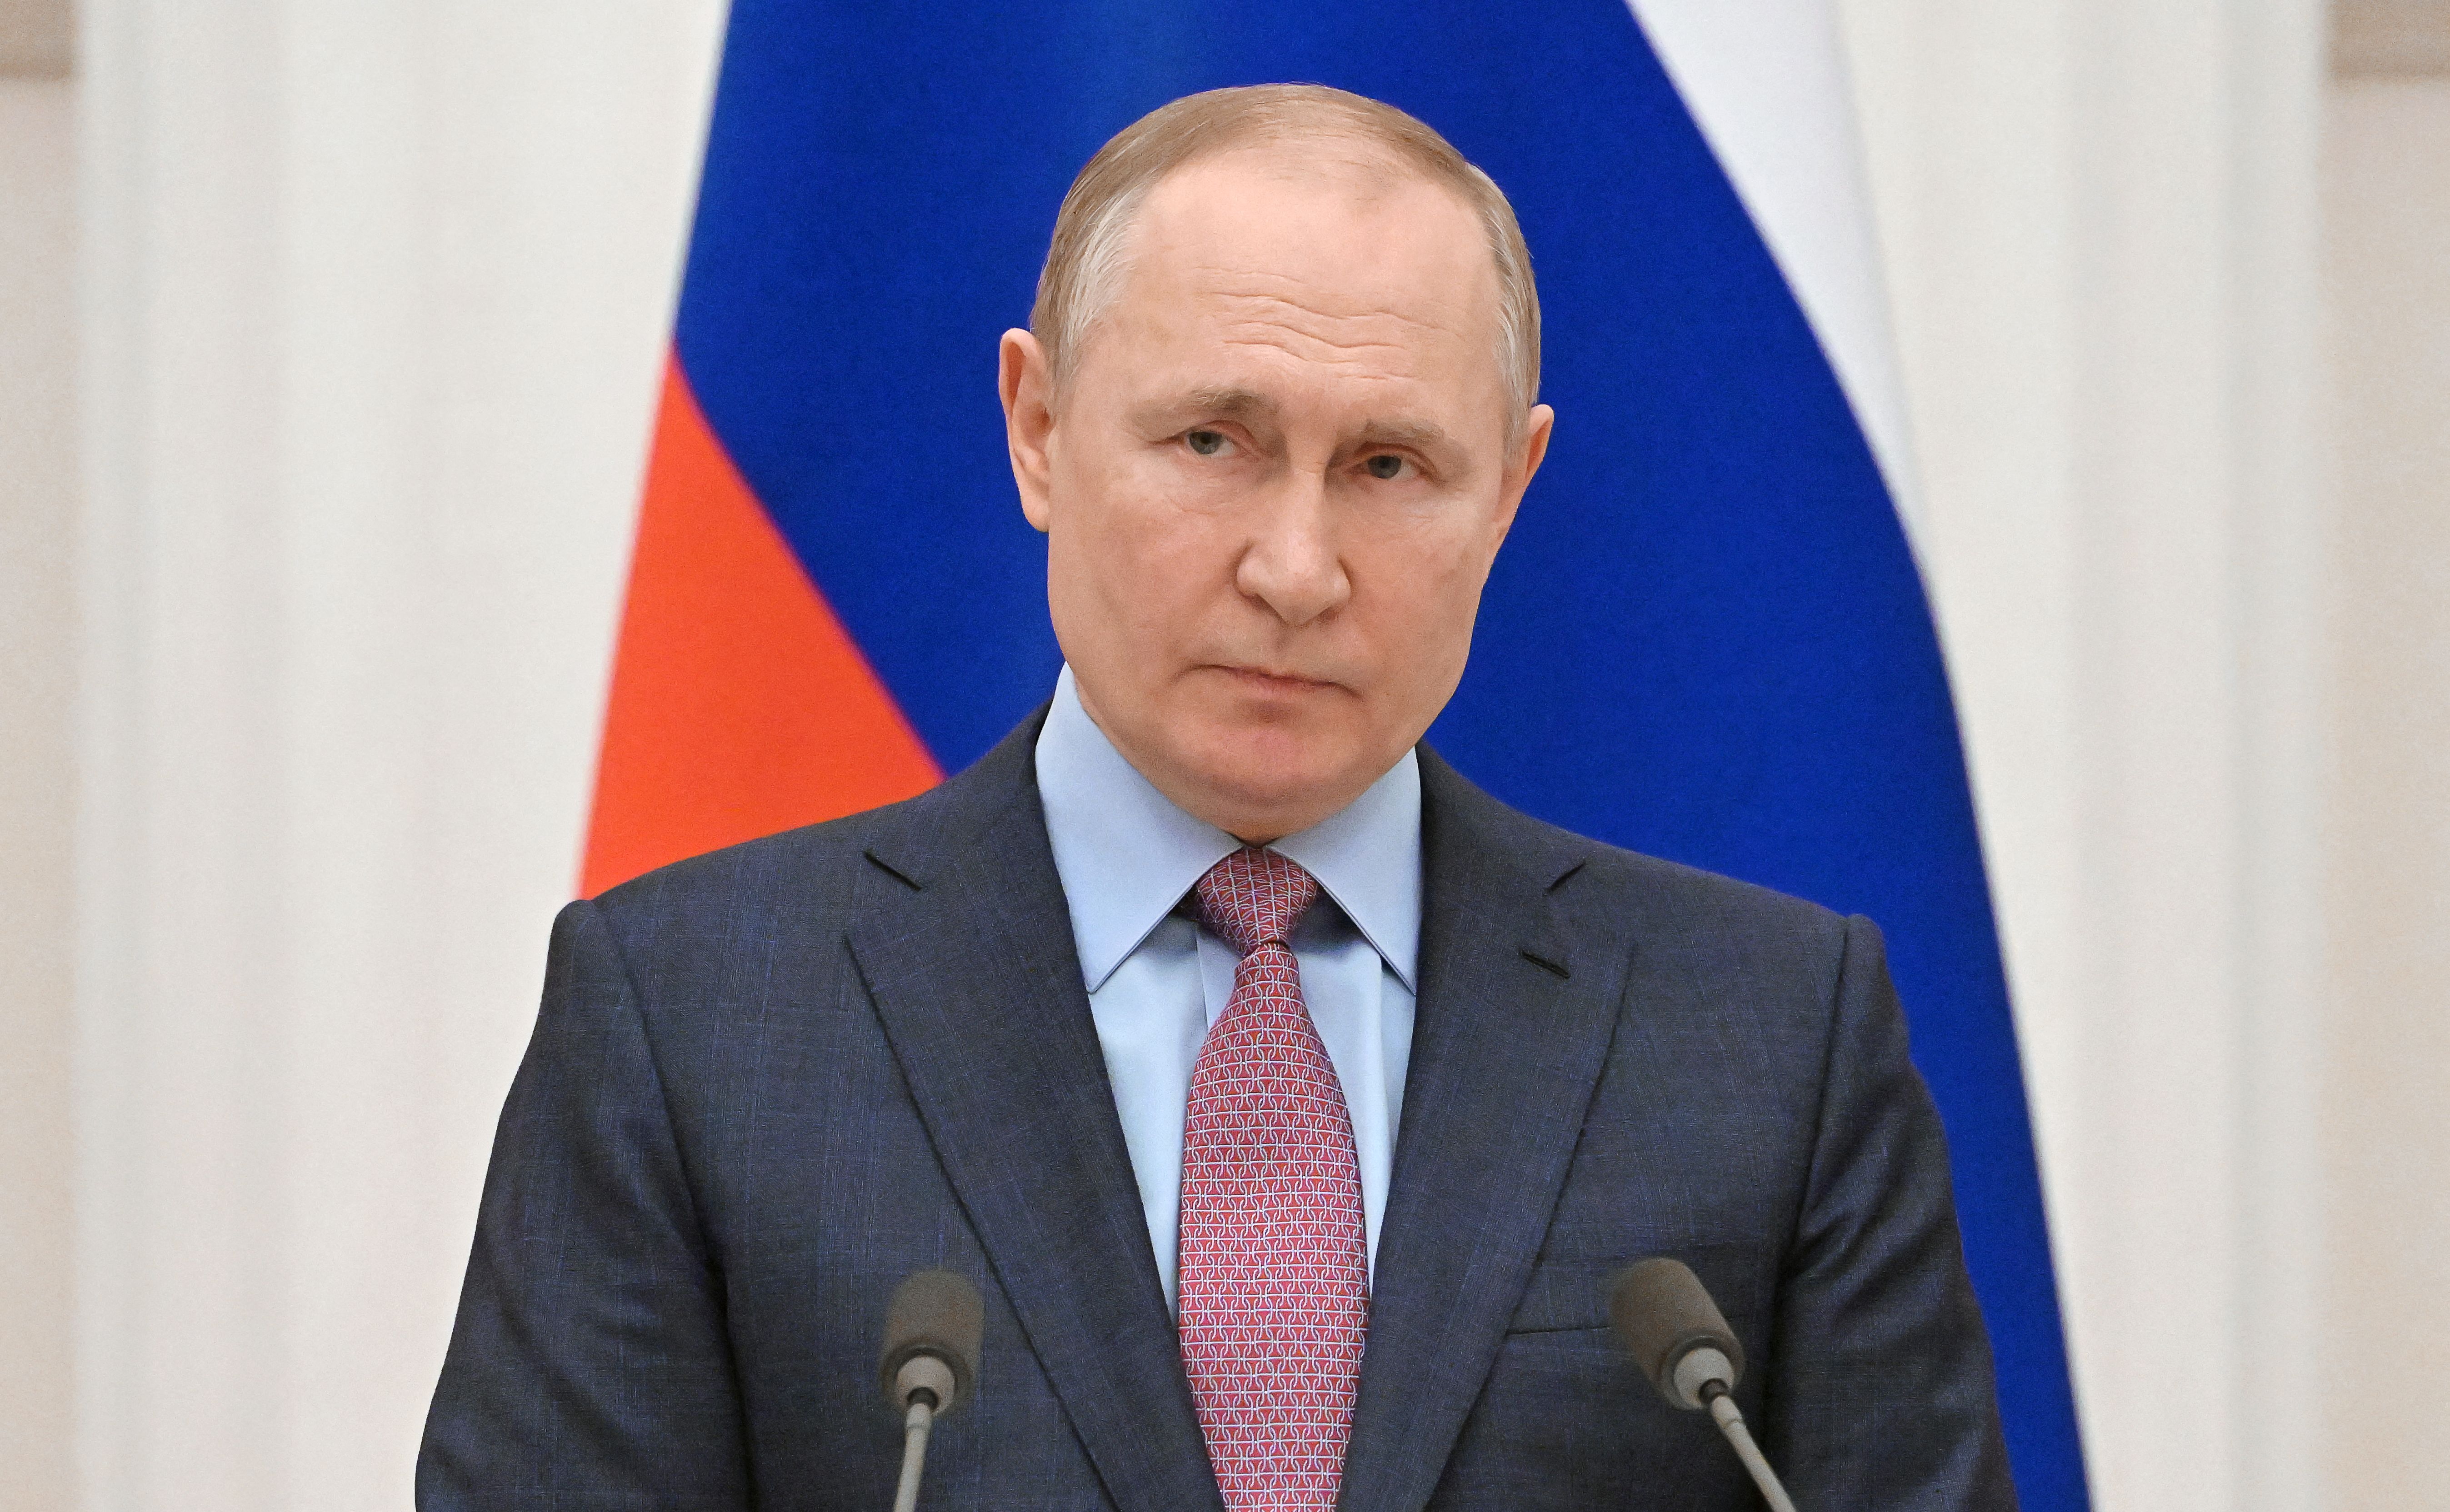 Russian president Vladimir Putin, wearing a suit and tie, stands at a podium in front of a Russian flag.